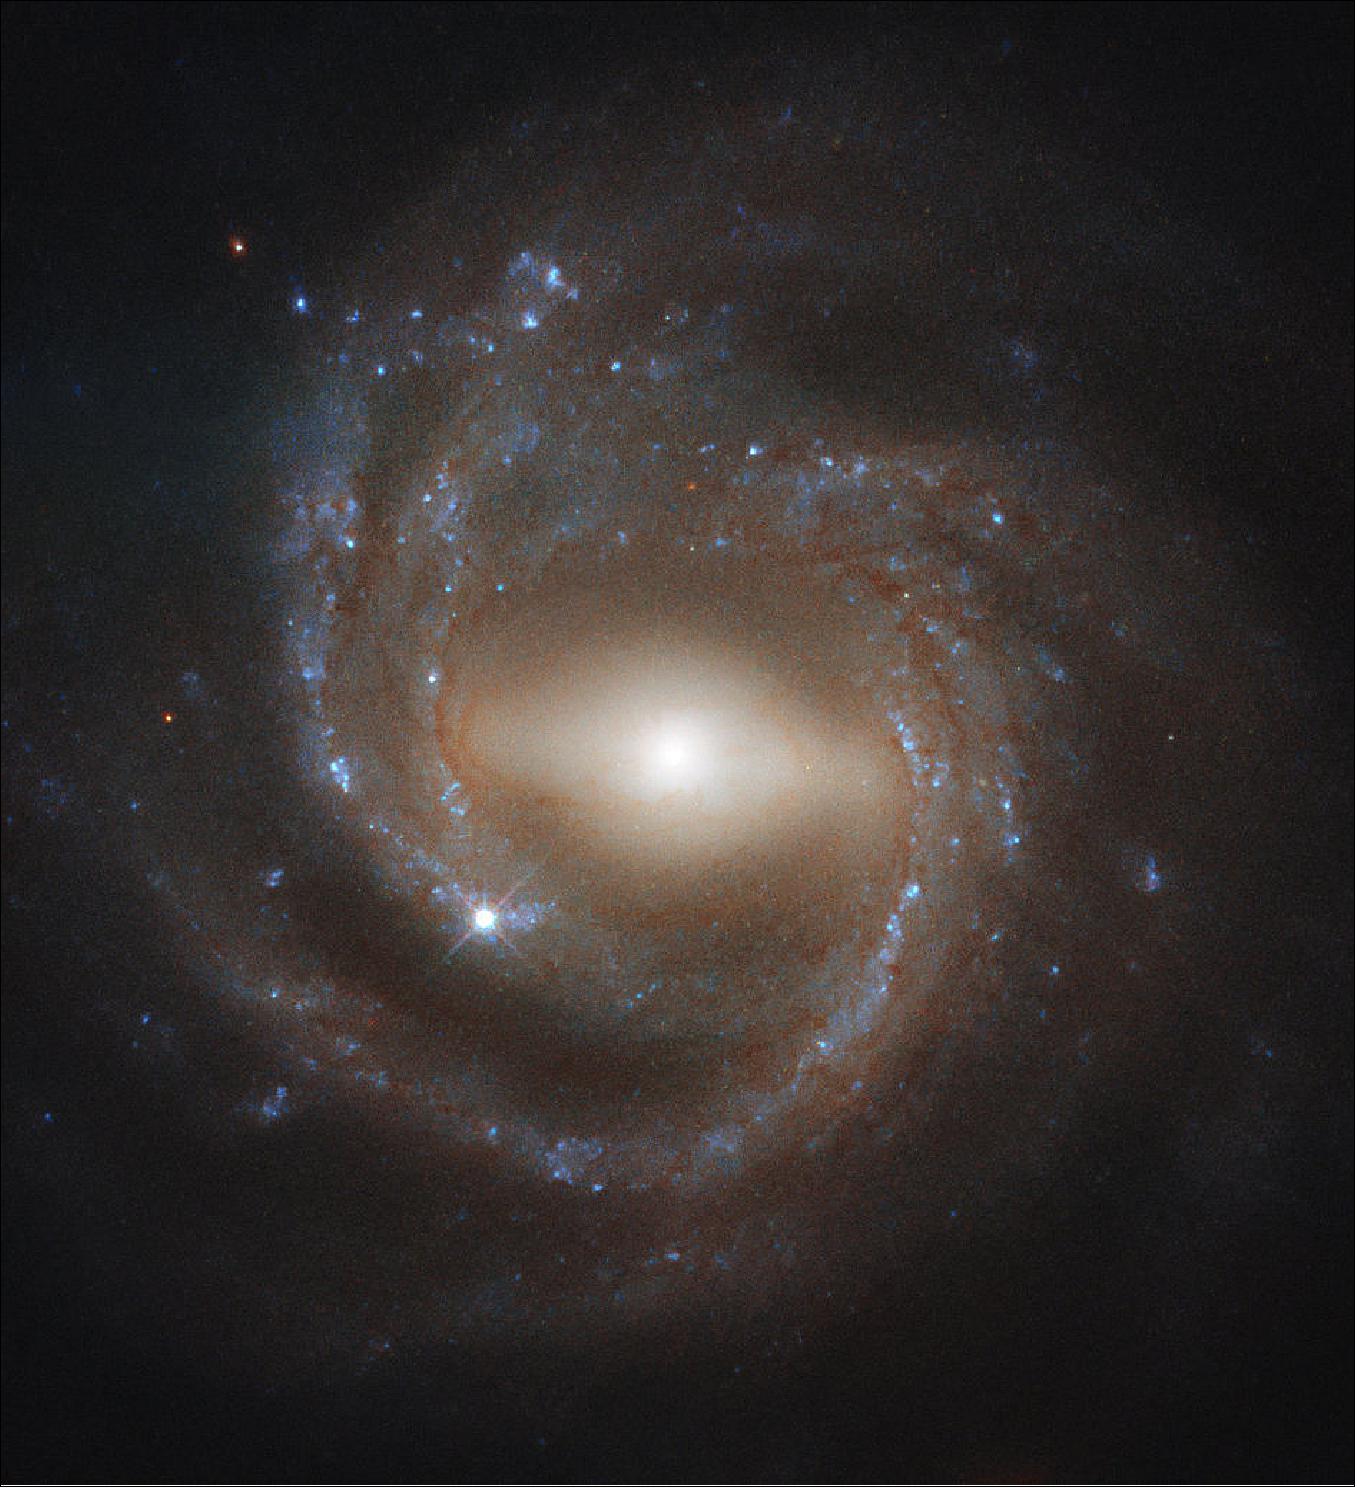 Figure 45: Our galaxy, the Milky Way, is thought to be a barred spiral like NGC 7773. Shown here, NGC 7773 is a beautiful example of a barred spiral galaxy in the constellation Pegasus. A luminous bar-shaped structure cuts prominently through the galaxy's bright core, extending to the inner boundary of NGC 7773's sweeping, pinwheel-like spiral arms. Astronomers think that these bar structures emerge later in the lifetime of a galaxy, as star-forming material makes its way towards the galactic center — younger spirals do not feature barred structures as often as older spirals do, suggesting that bars are a sign of galactic maturity. They are also thought to act as stellar nurseries, as they gleam brightly with copious numbers of youthful stars (image credit: ESA/Hubble & NASA, J. Walsh)